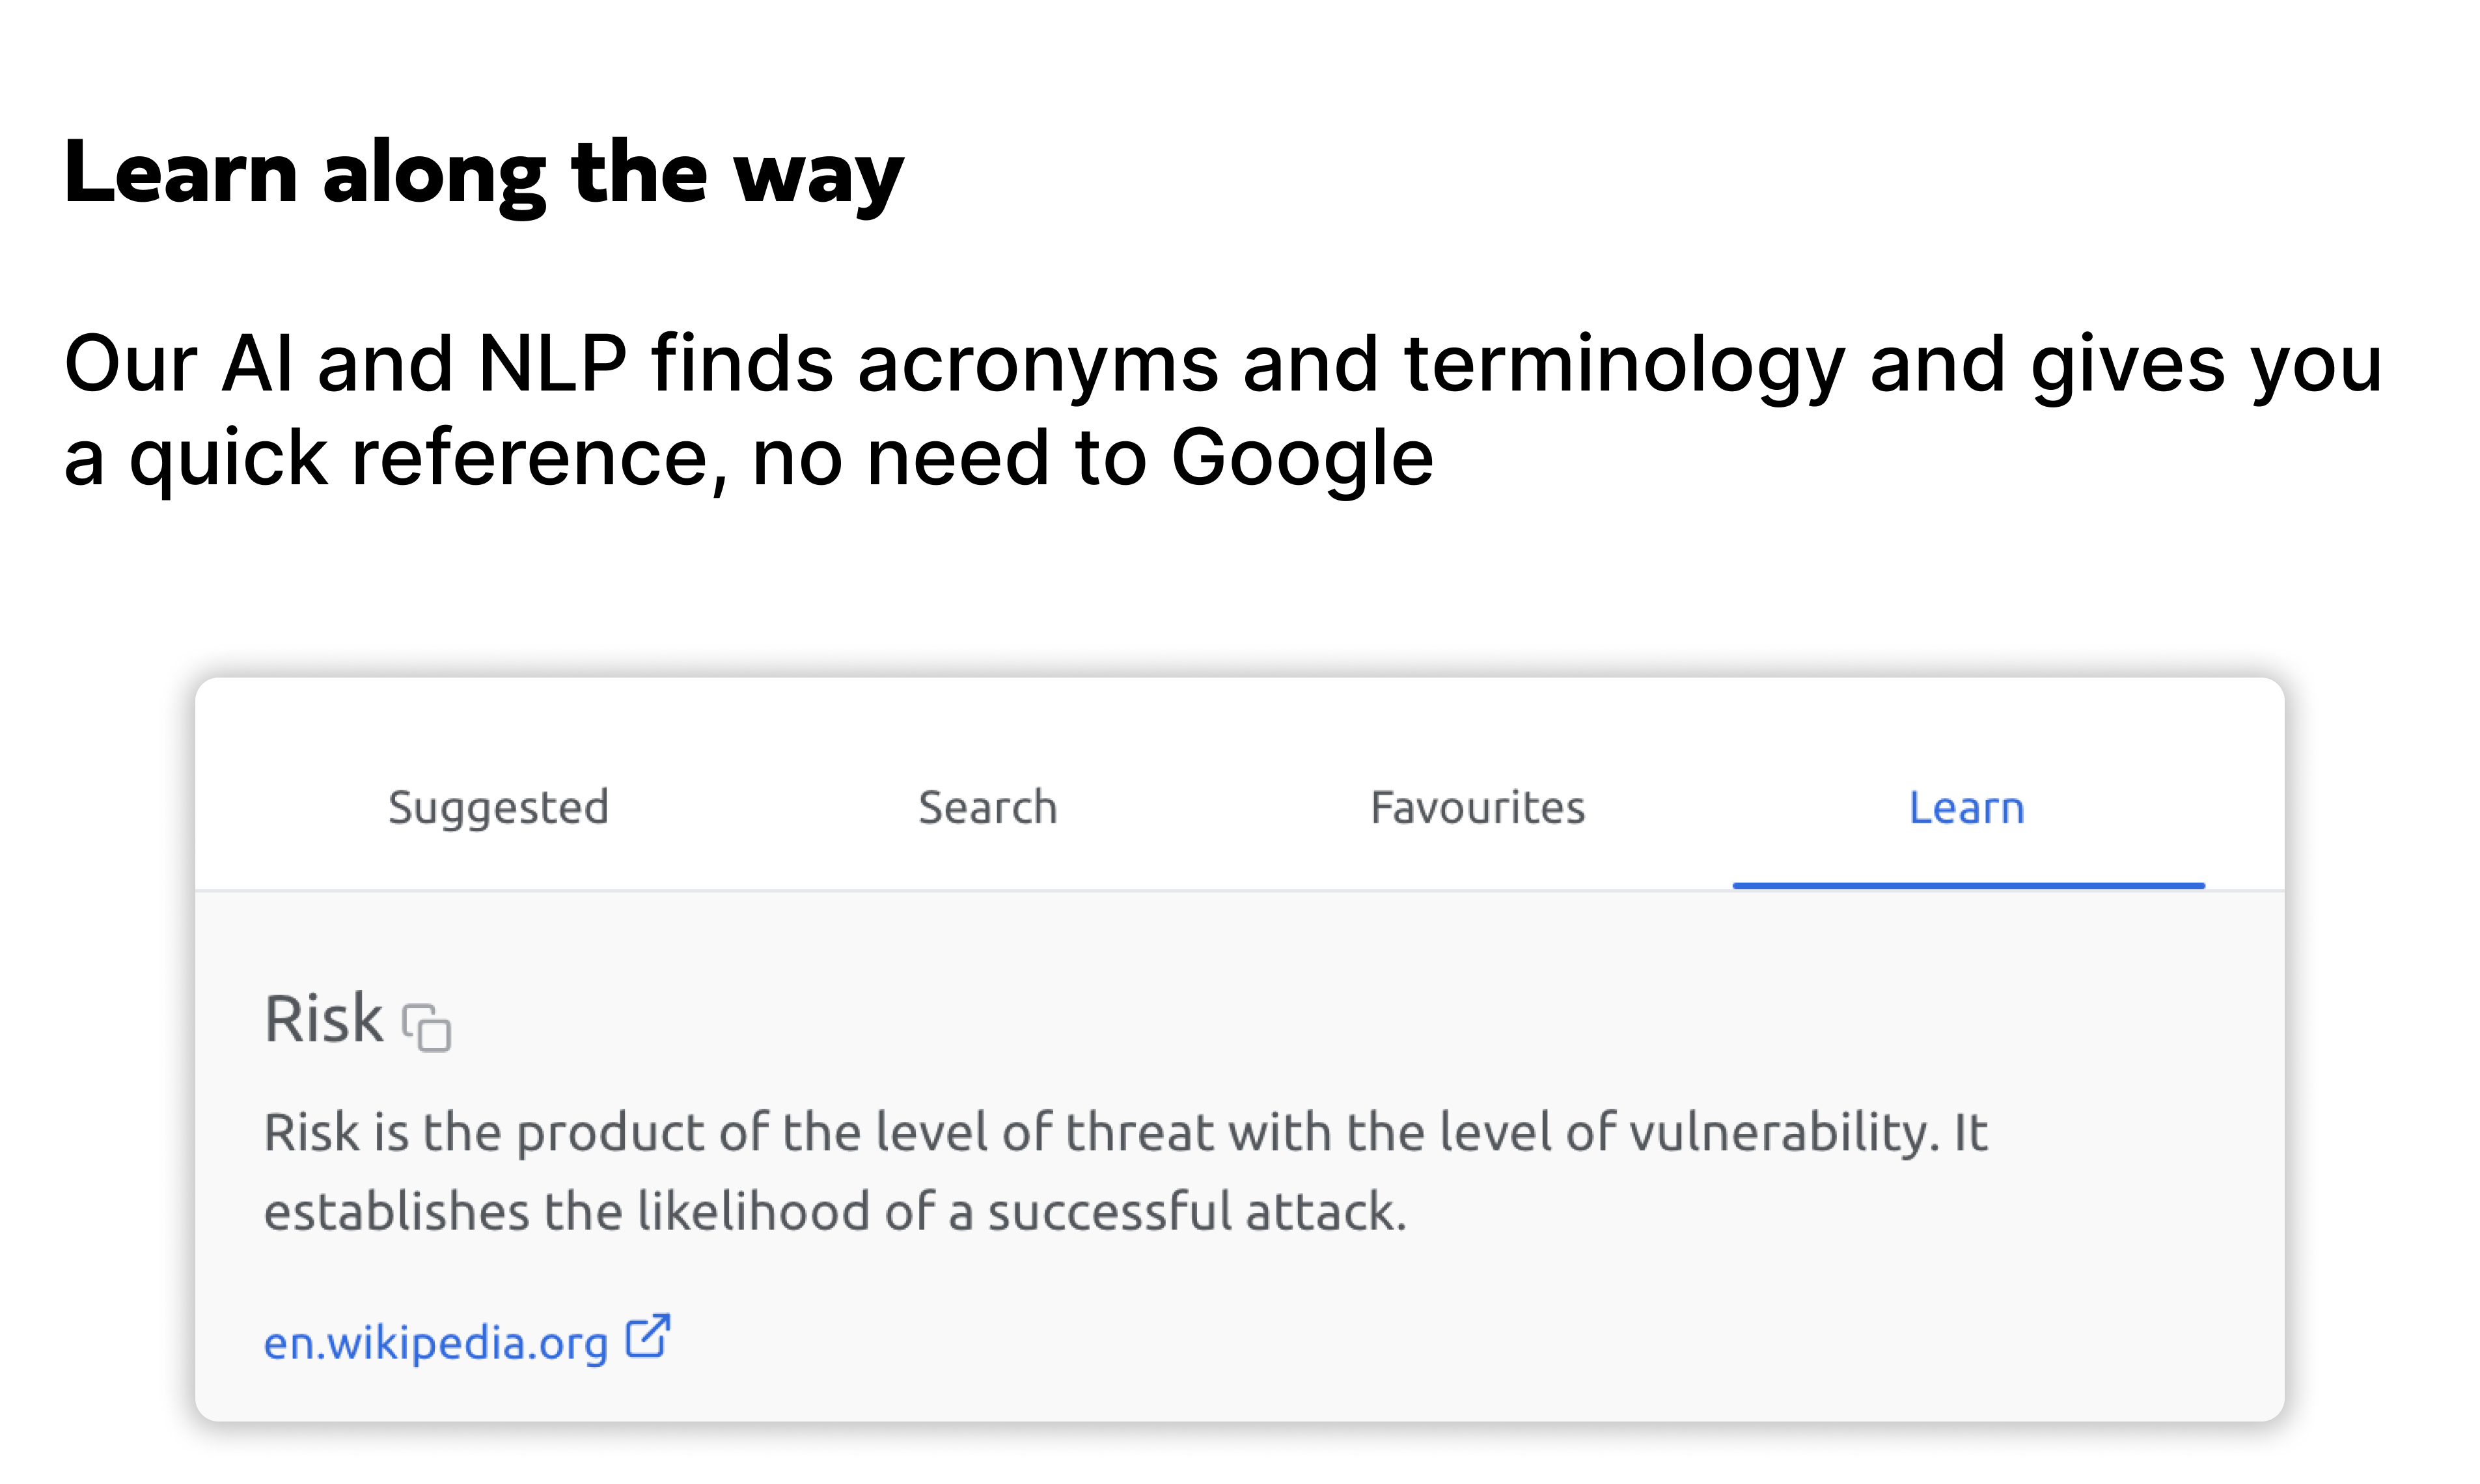 Integrated knowledgebase and dictionary of security terms